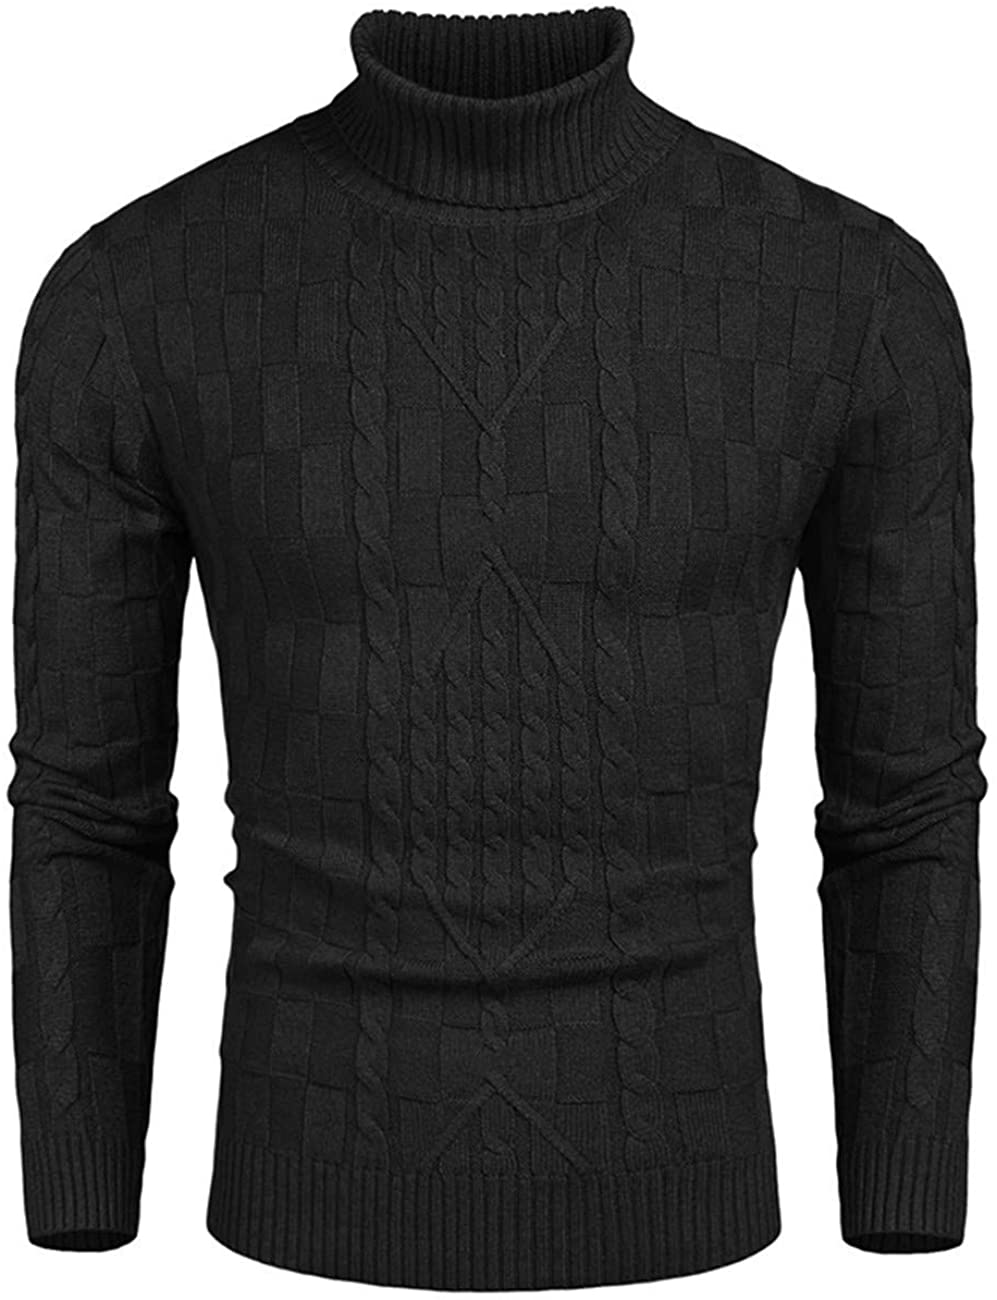 COOFANDY Men's Slim Fit Turtleneck Sweater Casual Cable Knit Pullover ...